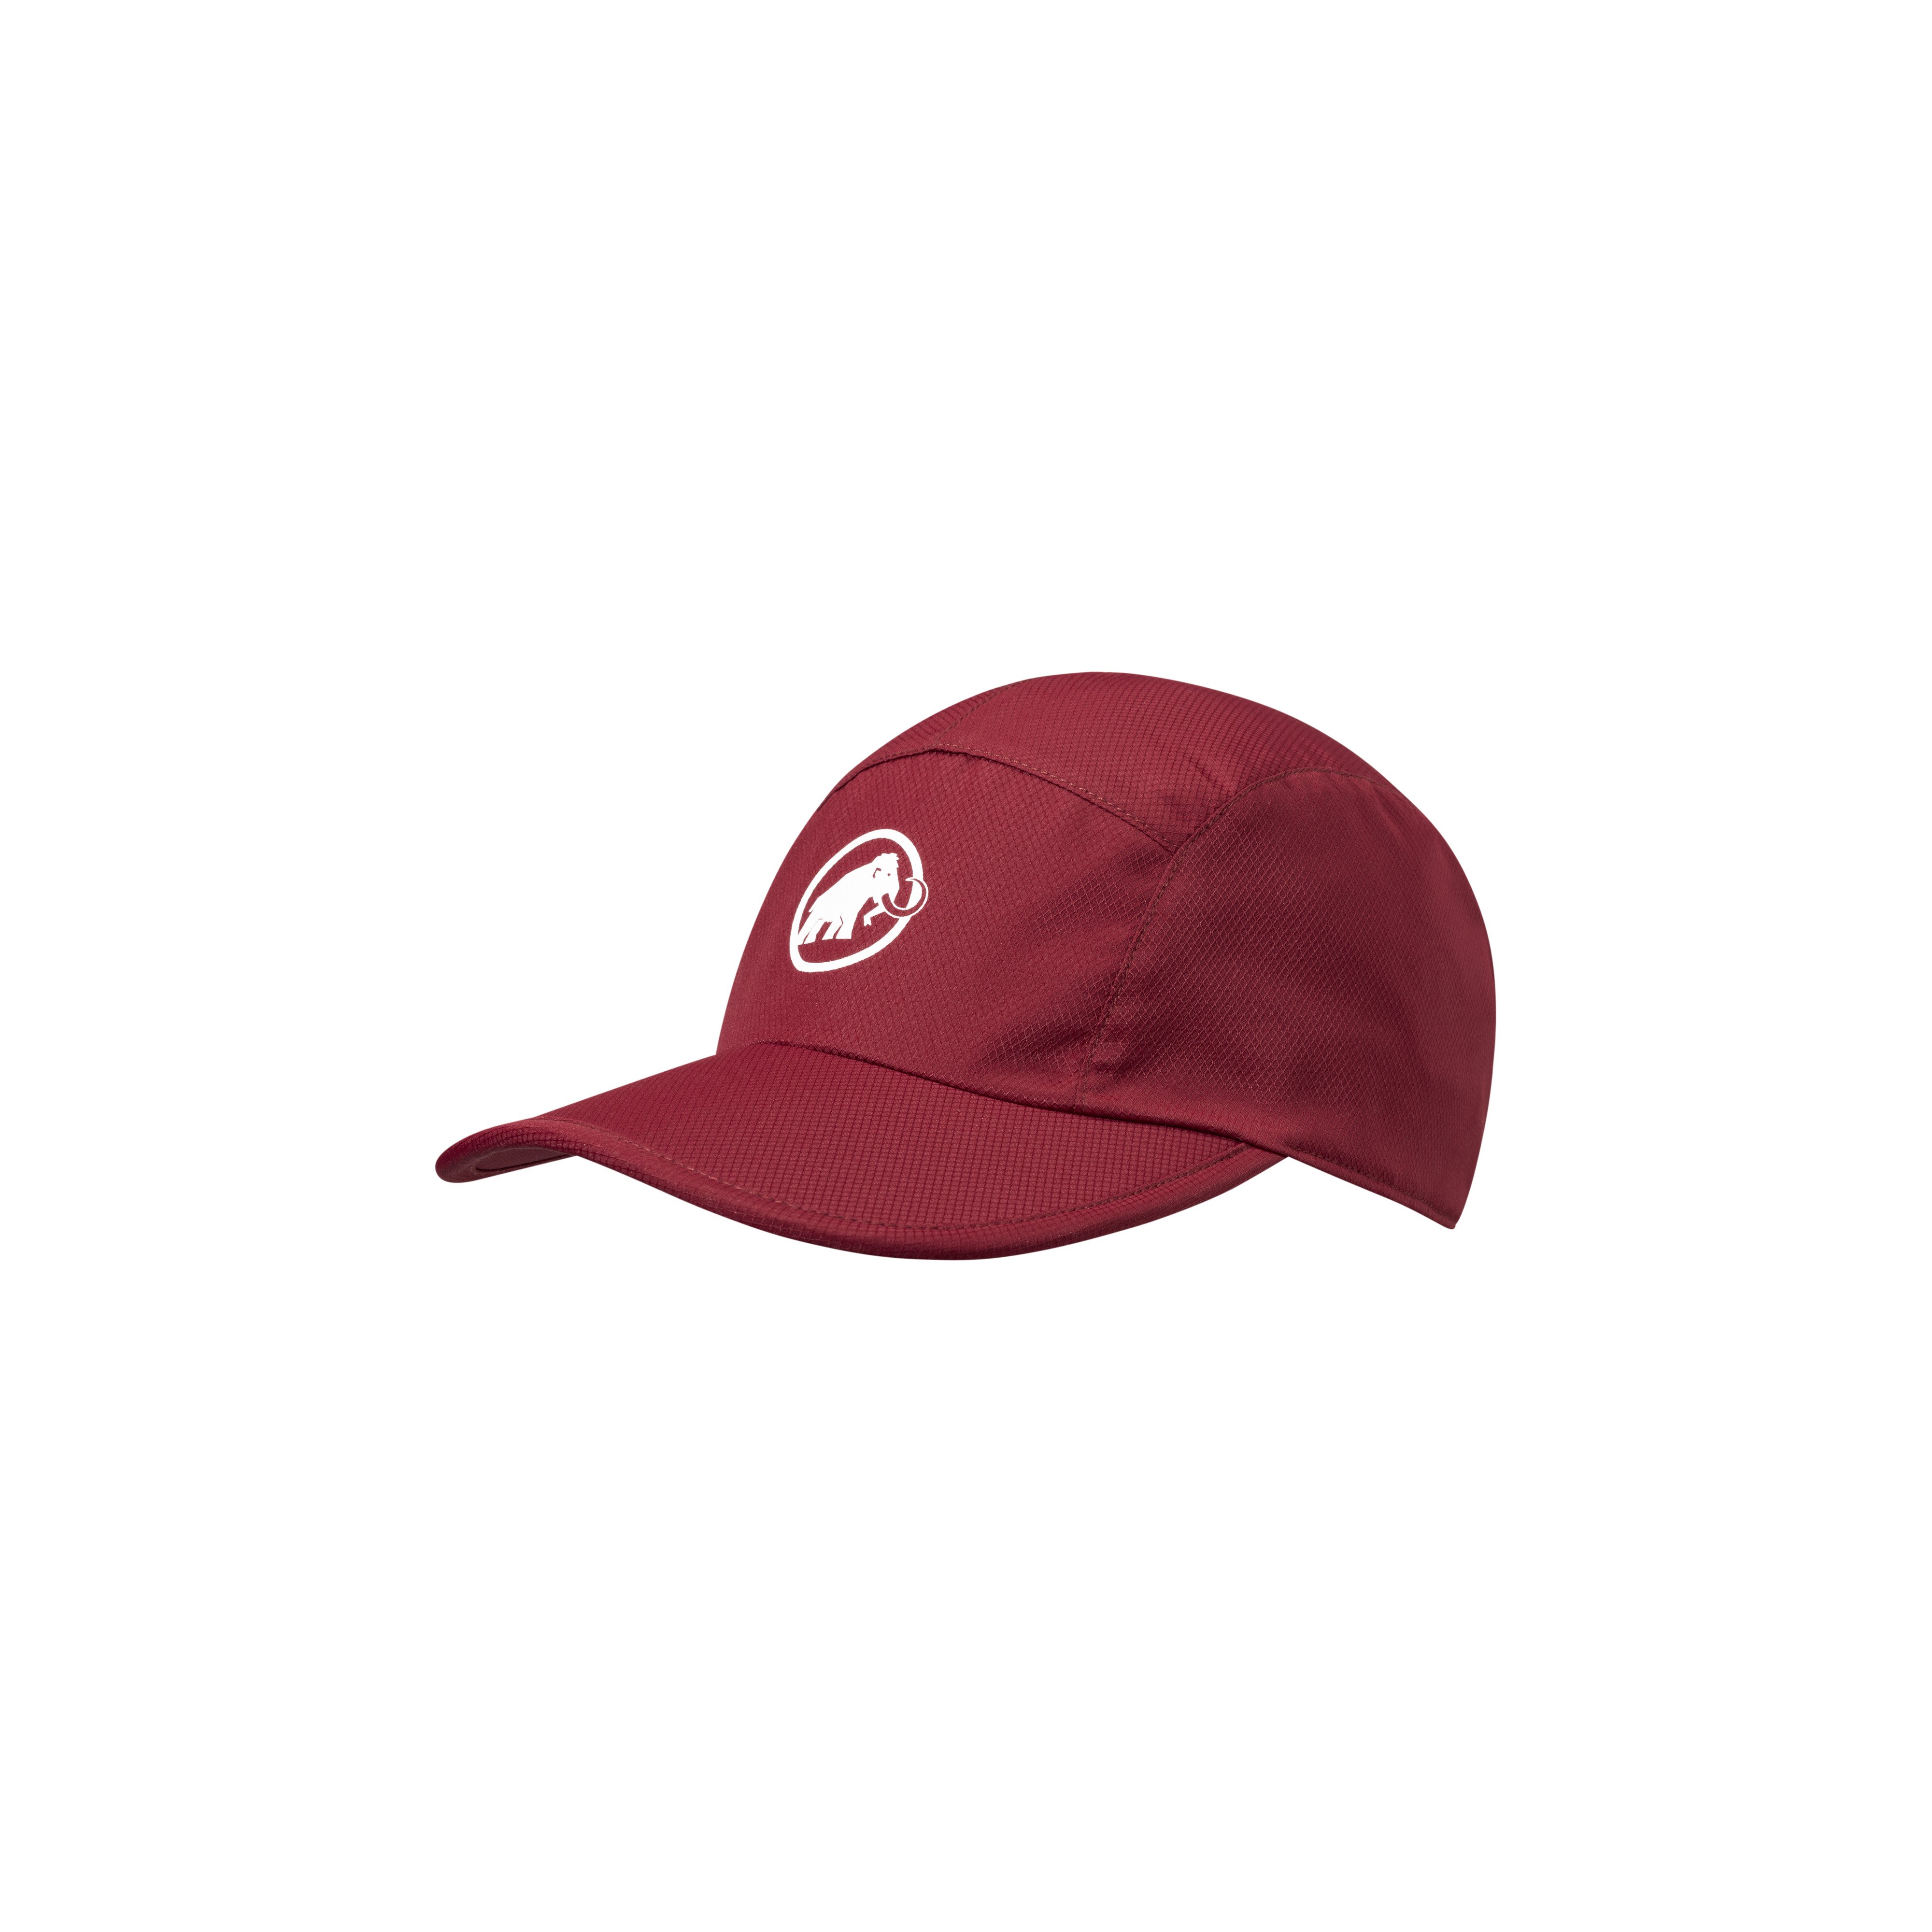 Aenergy Light Cap - blood red, L-XL product image